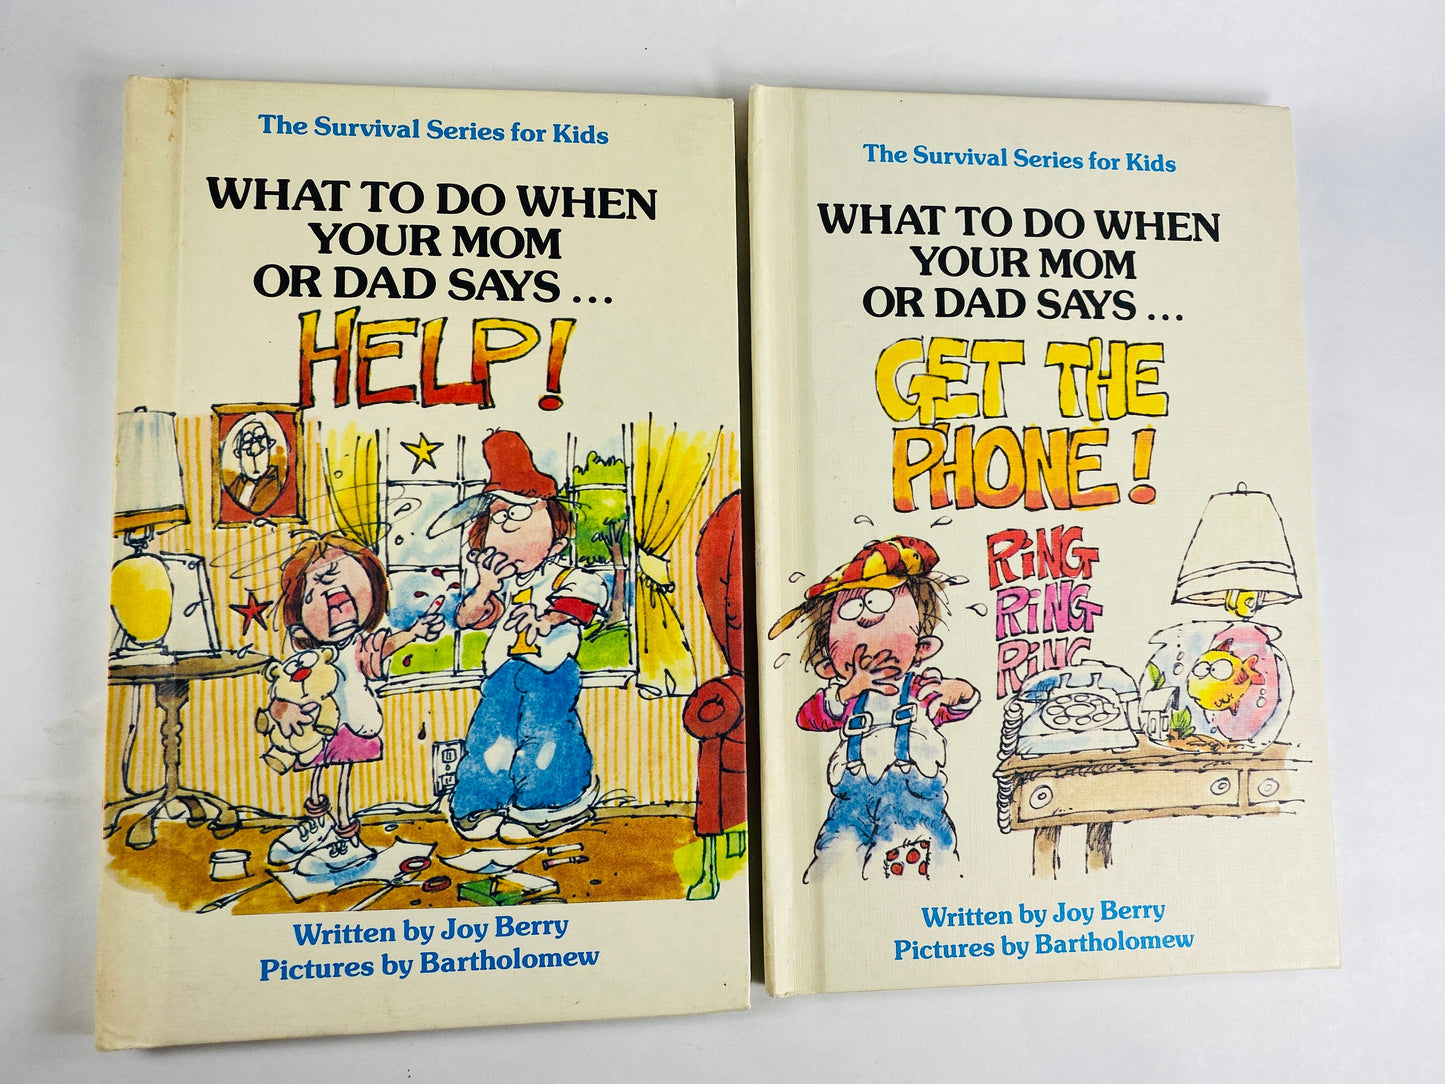 1983 Help Me Be Good Series for Kids by Joy Berry set of 2 vintage books. Gen X telephone gift decor lot. white elephant Stocking stuffer